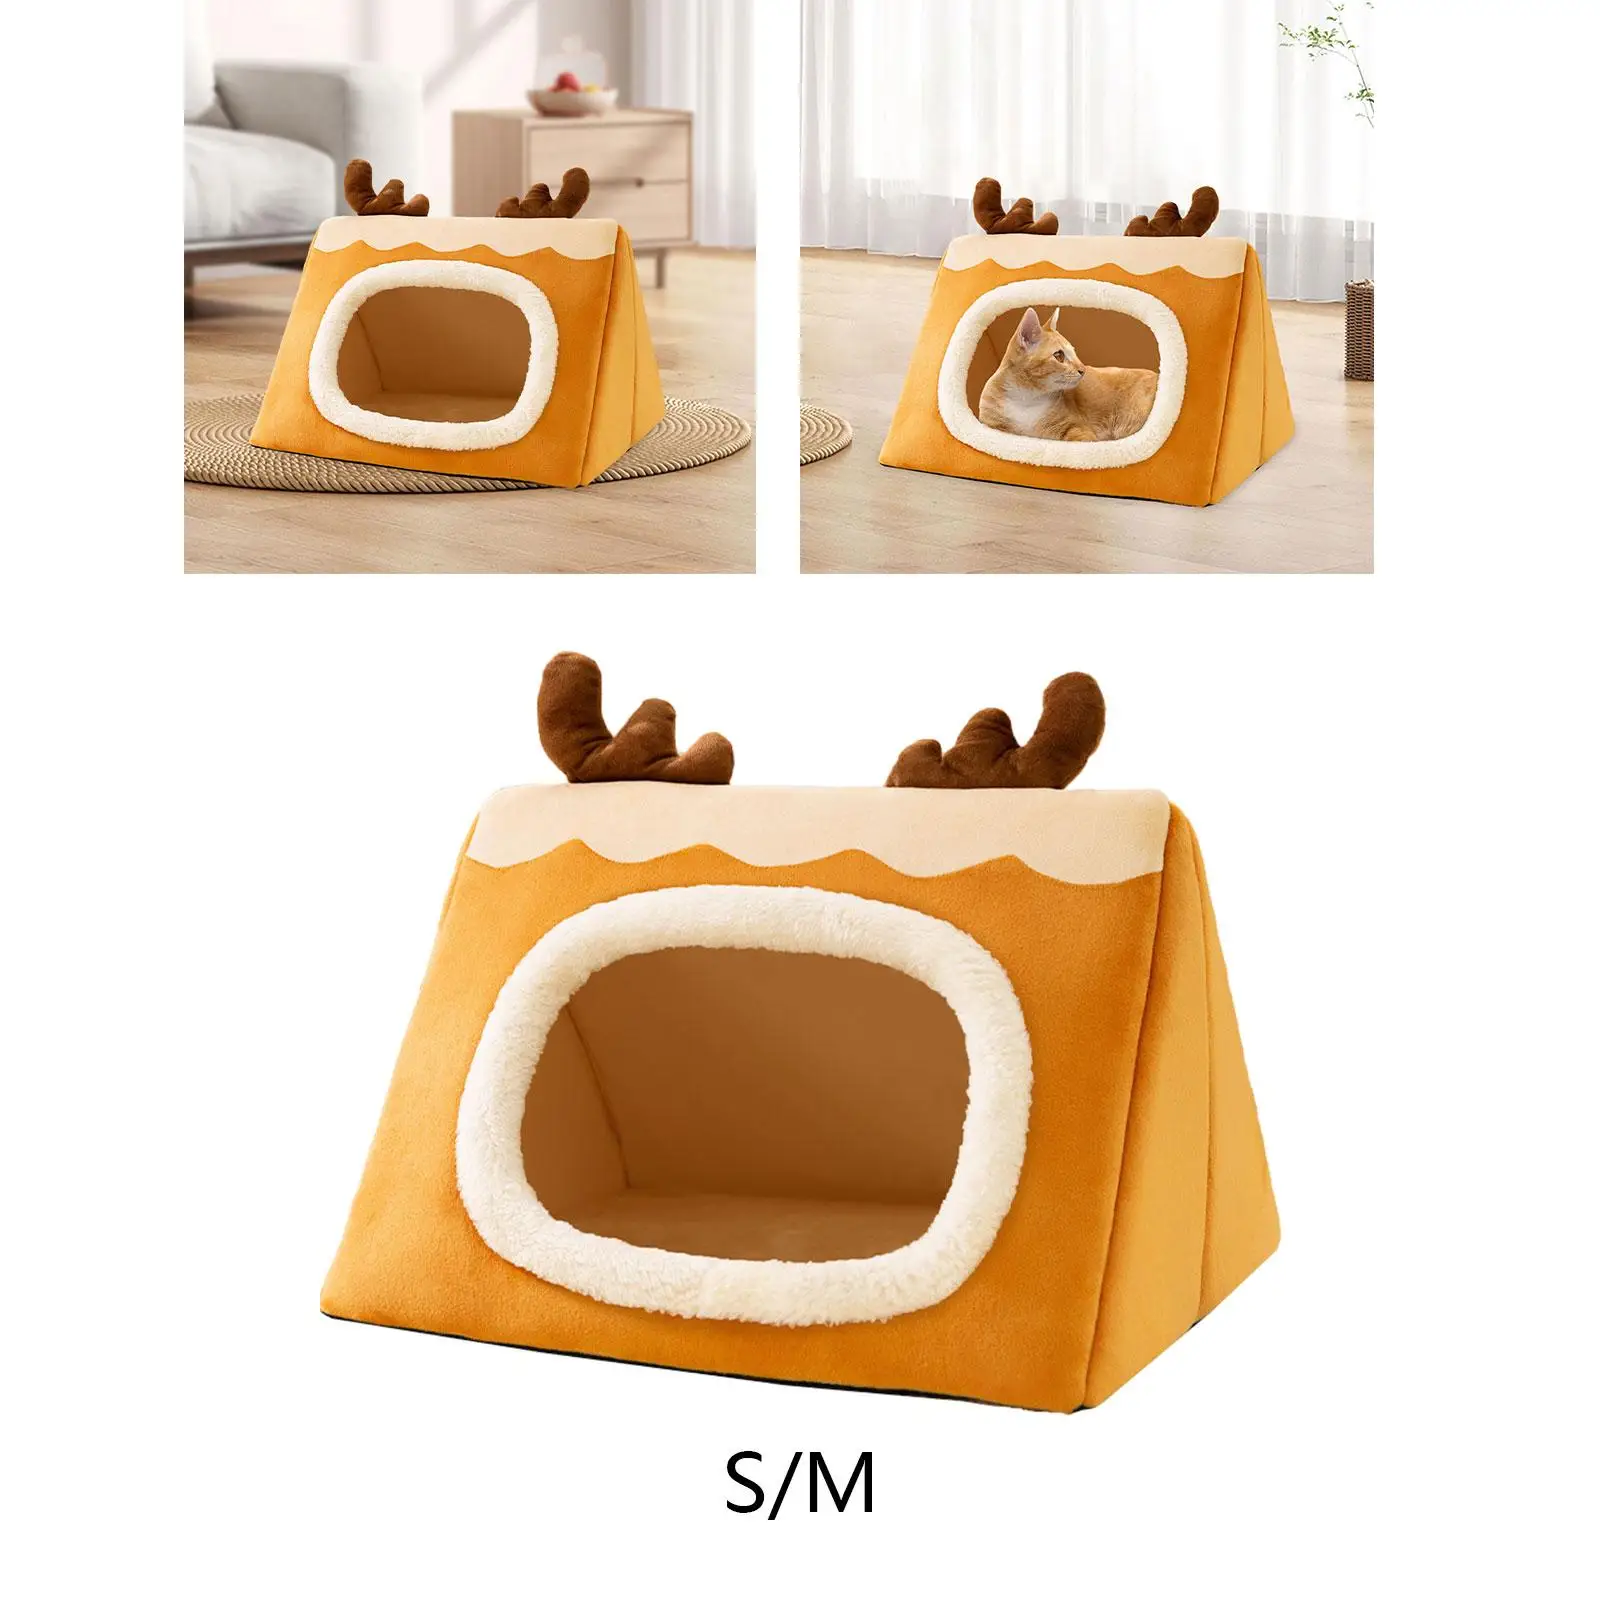 Pet Bed Washable Non Slip Semi Enclosed Warm Pet House Cute Pet Cat Nest Cat Bed for Kitty Pets Dogs Cat Small Animals Indoor